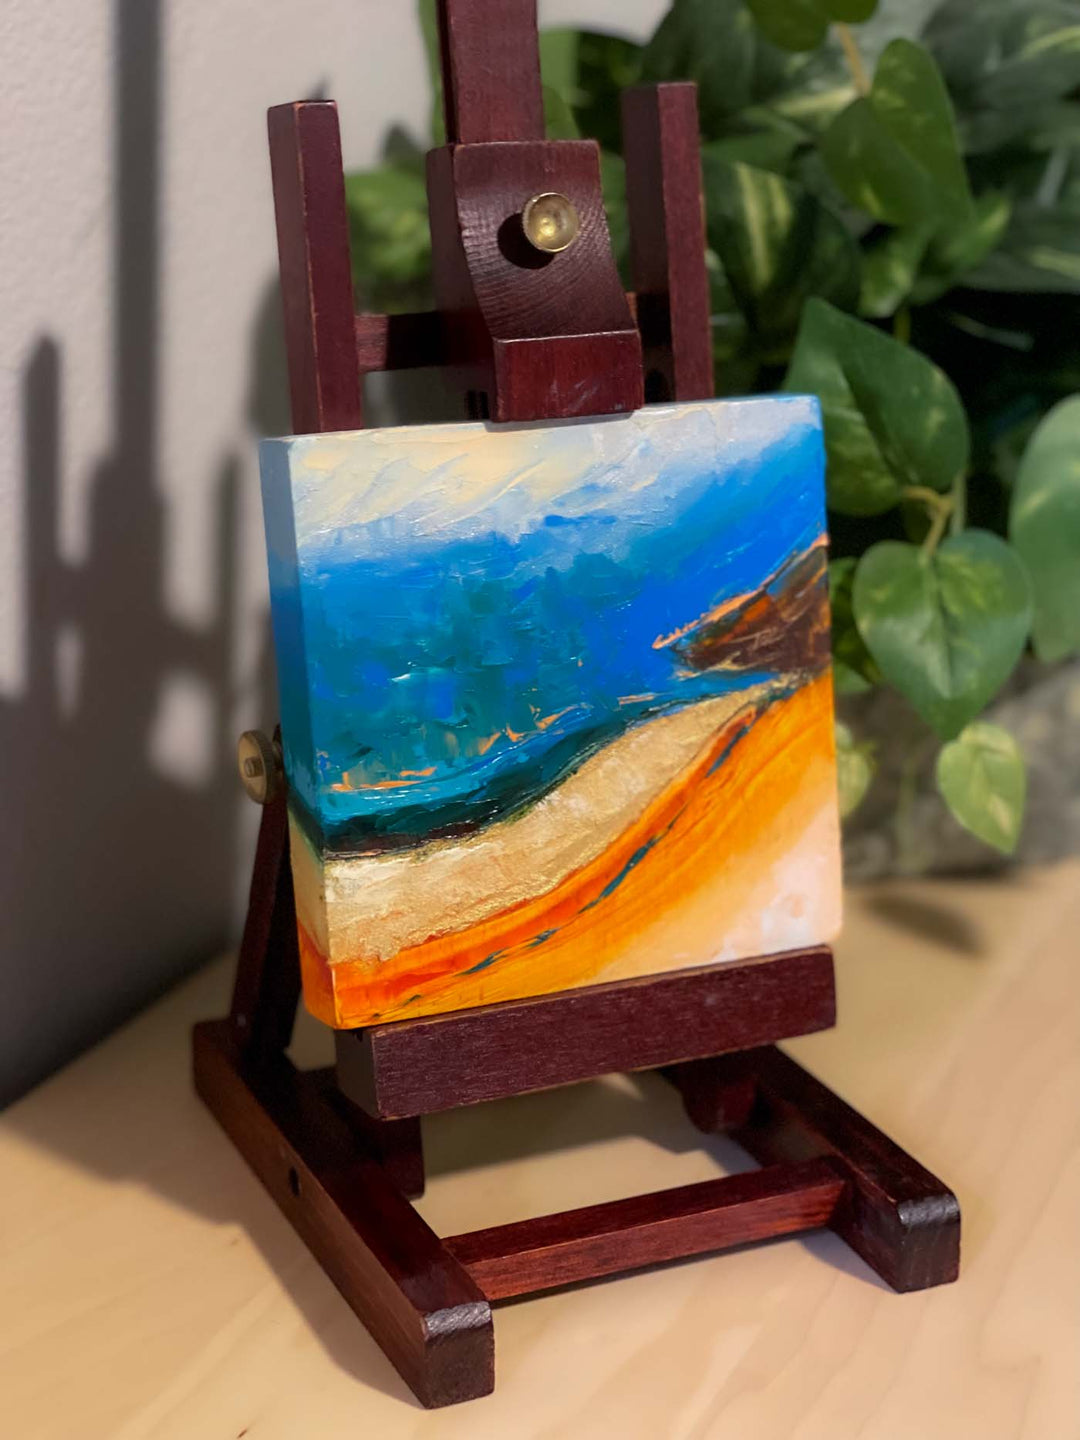 River Shore Original Miniature Painting Abstract Landscape Oil Textured with Palette Knife Inspired by Columbia River on easel